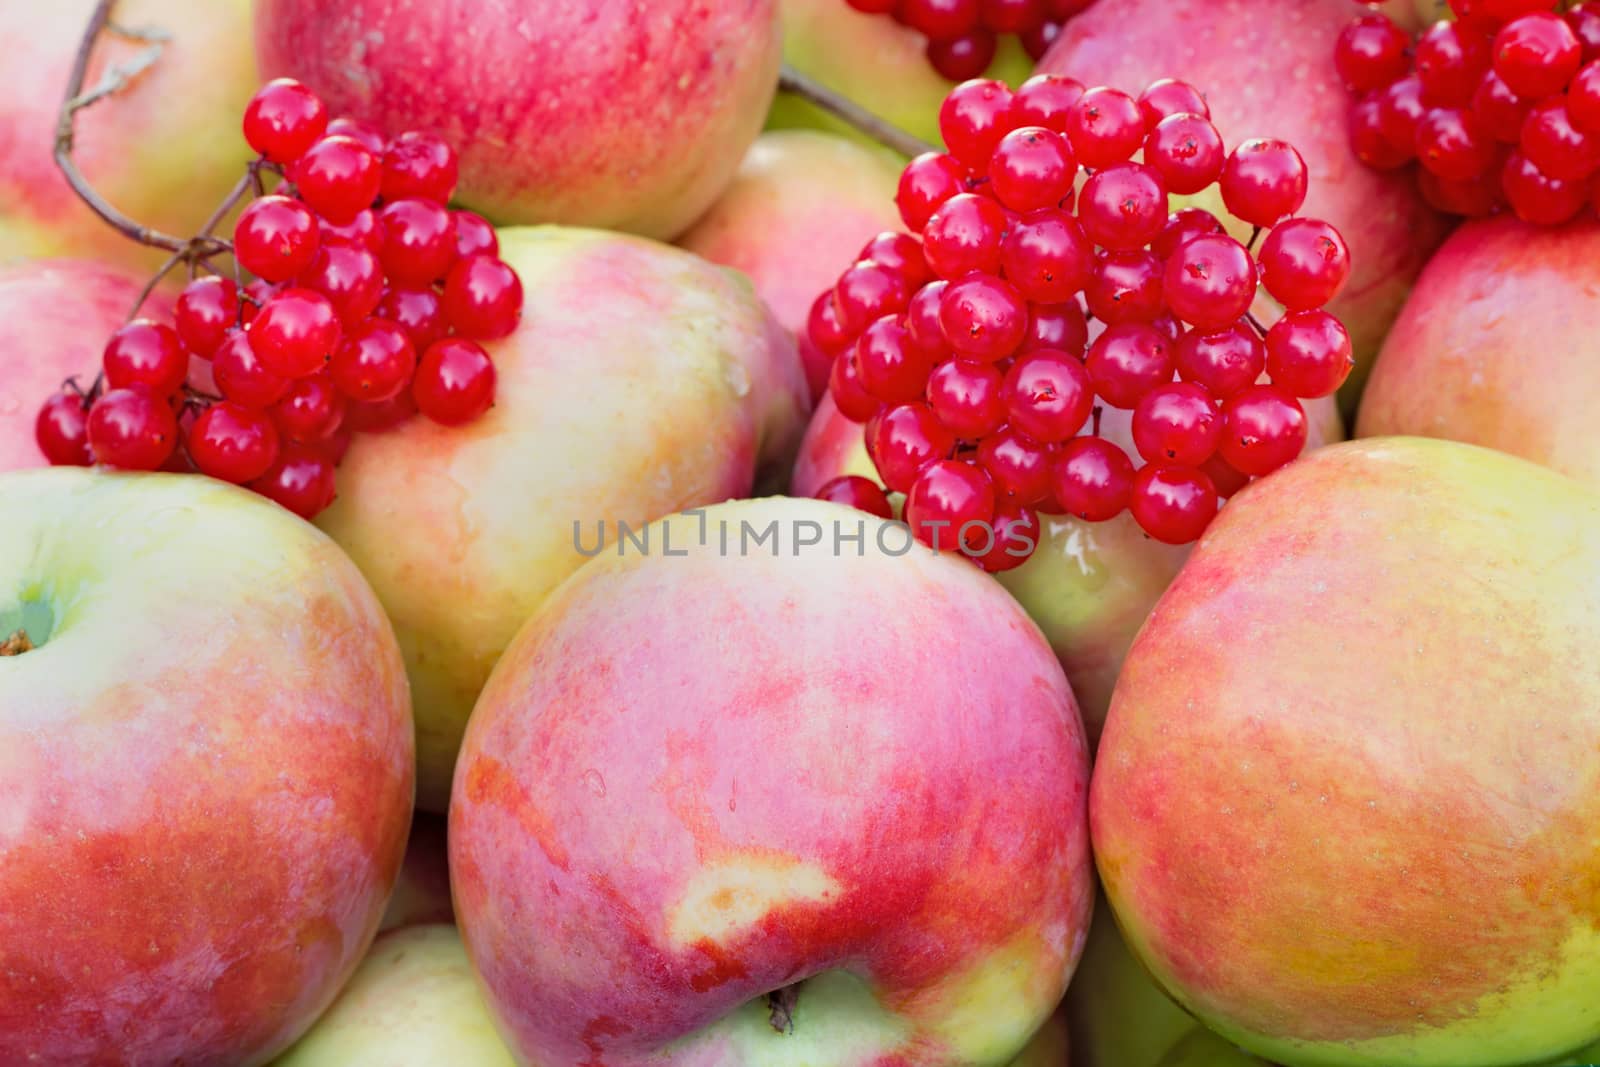 Large ripe apples and berries, photographed close up. by georgina198